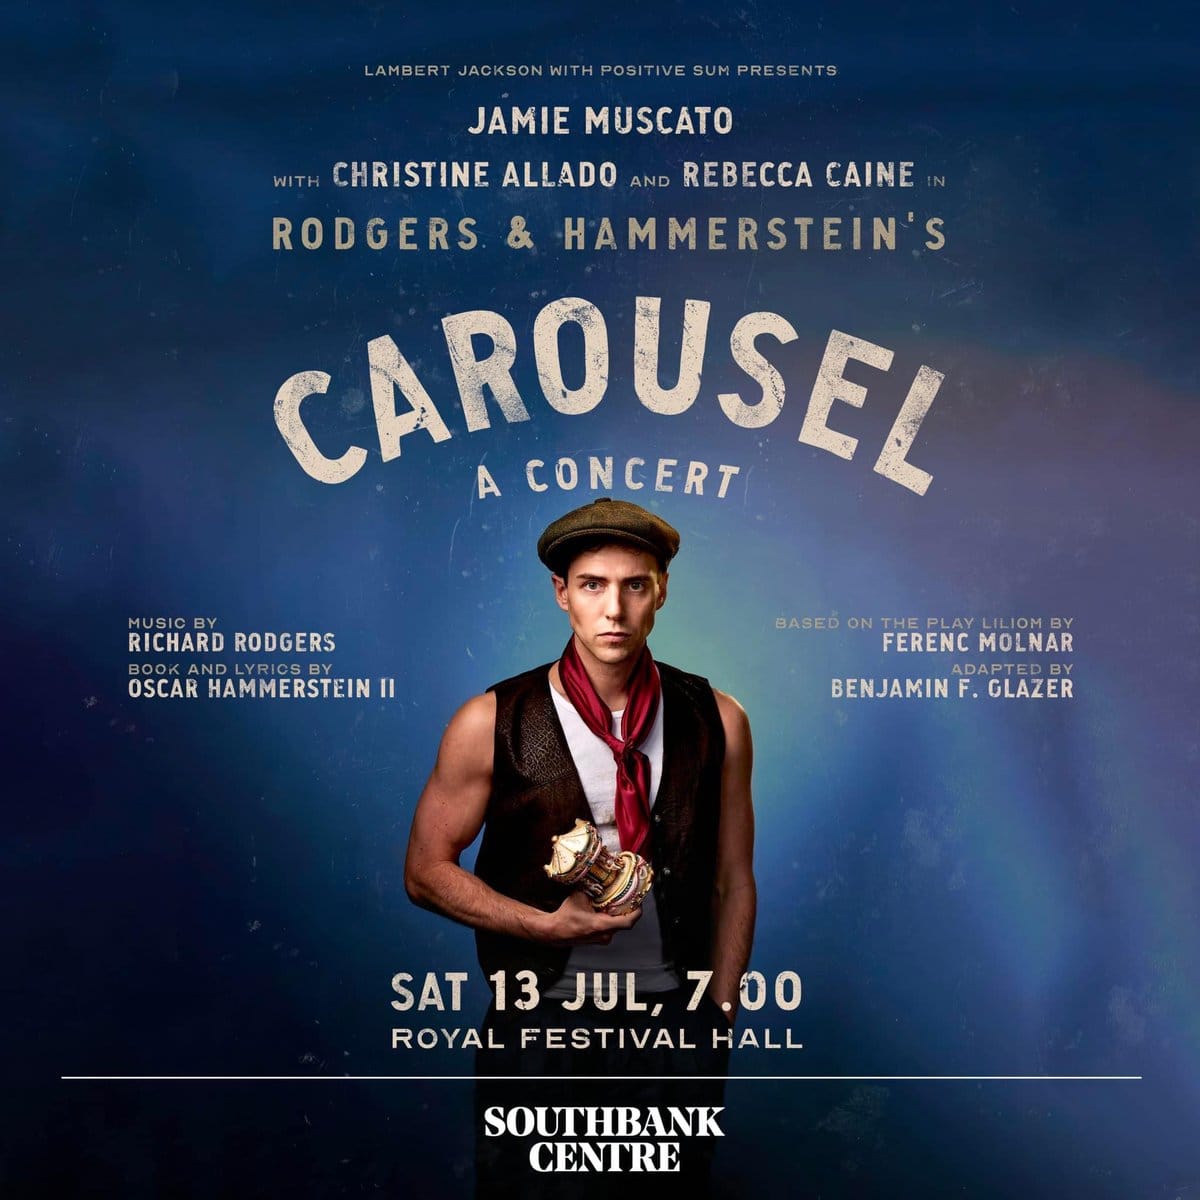 Carousel in Concert, at Royal Festival Hall